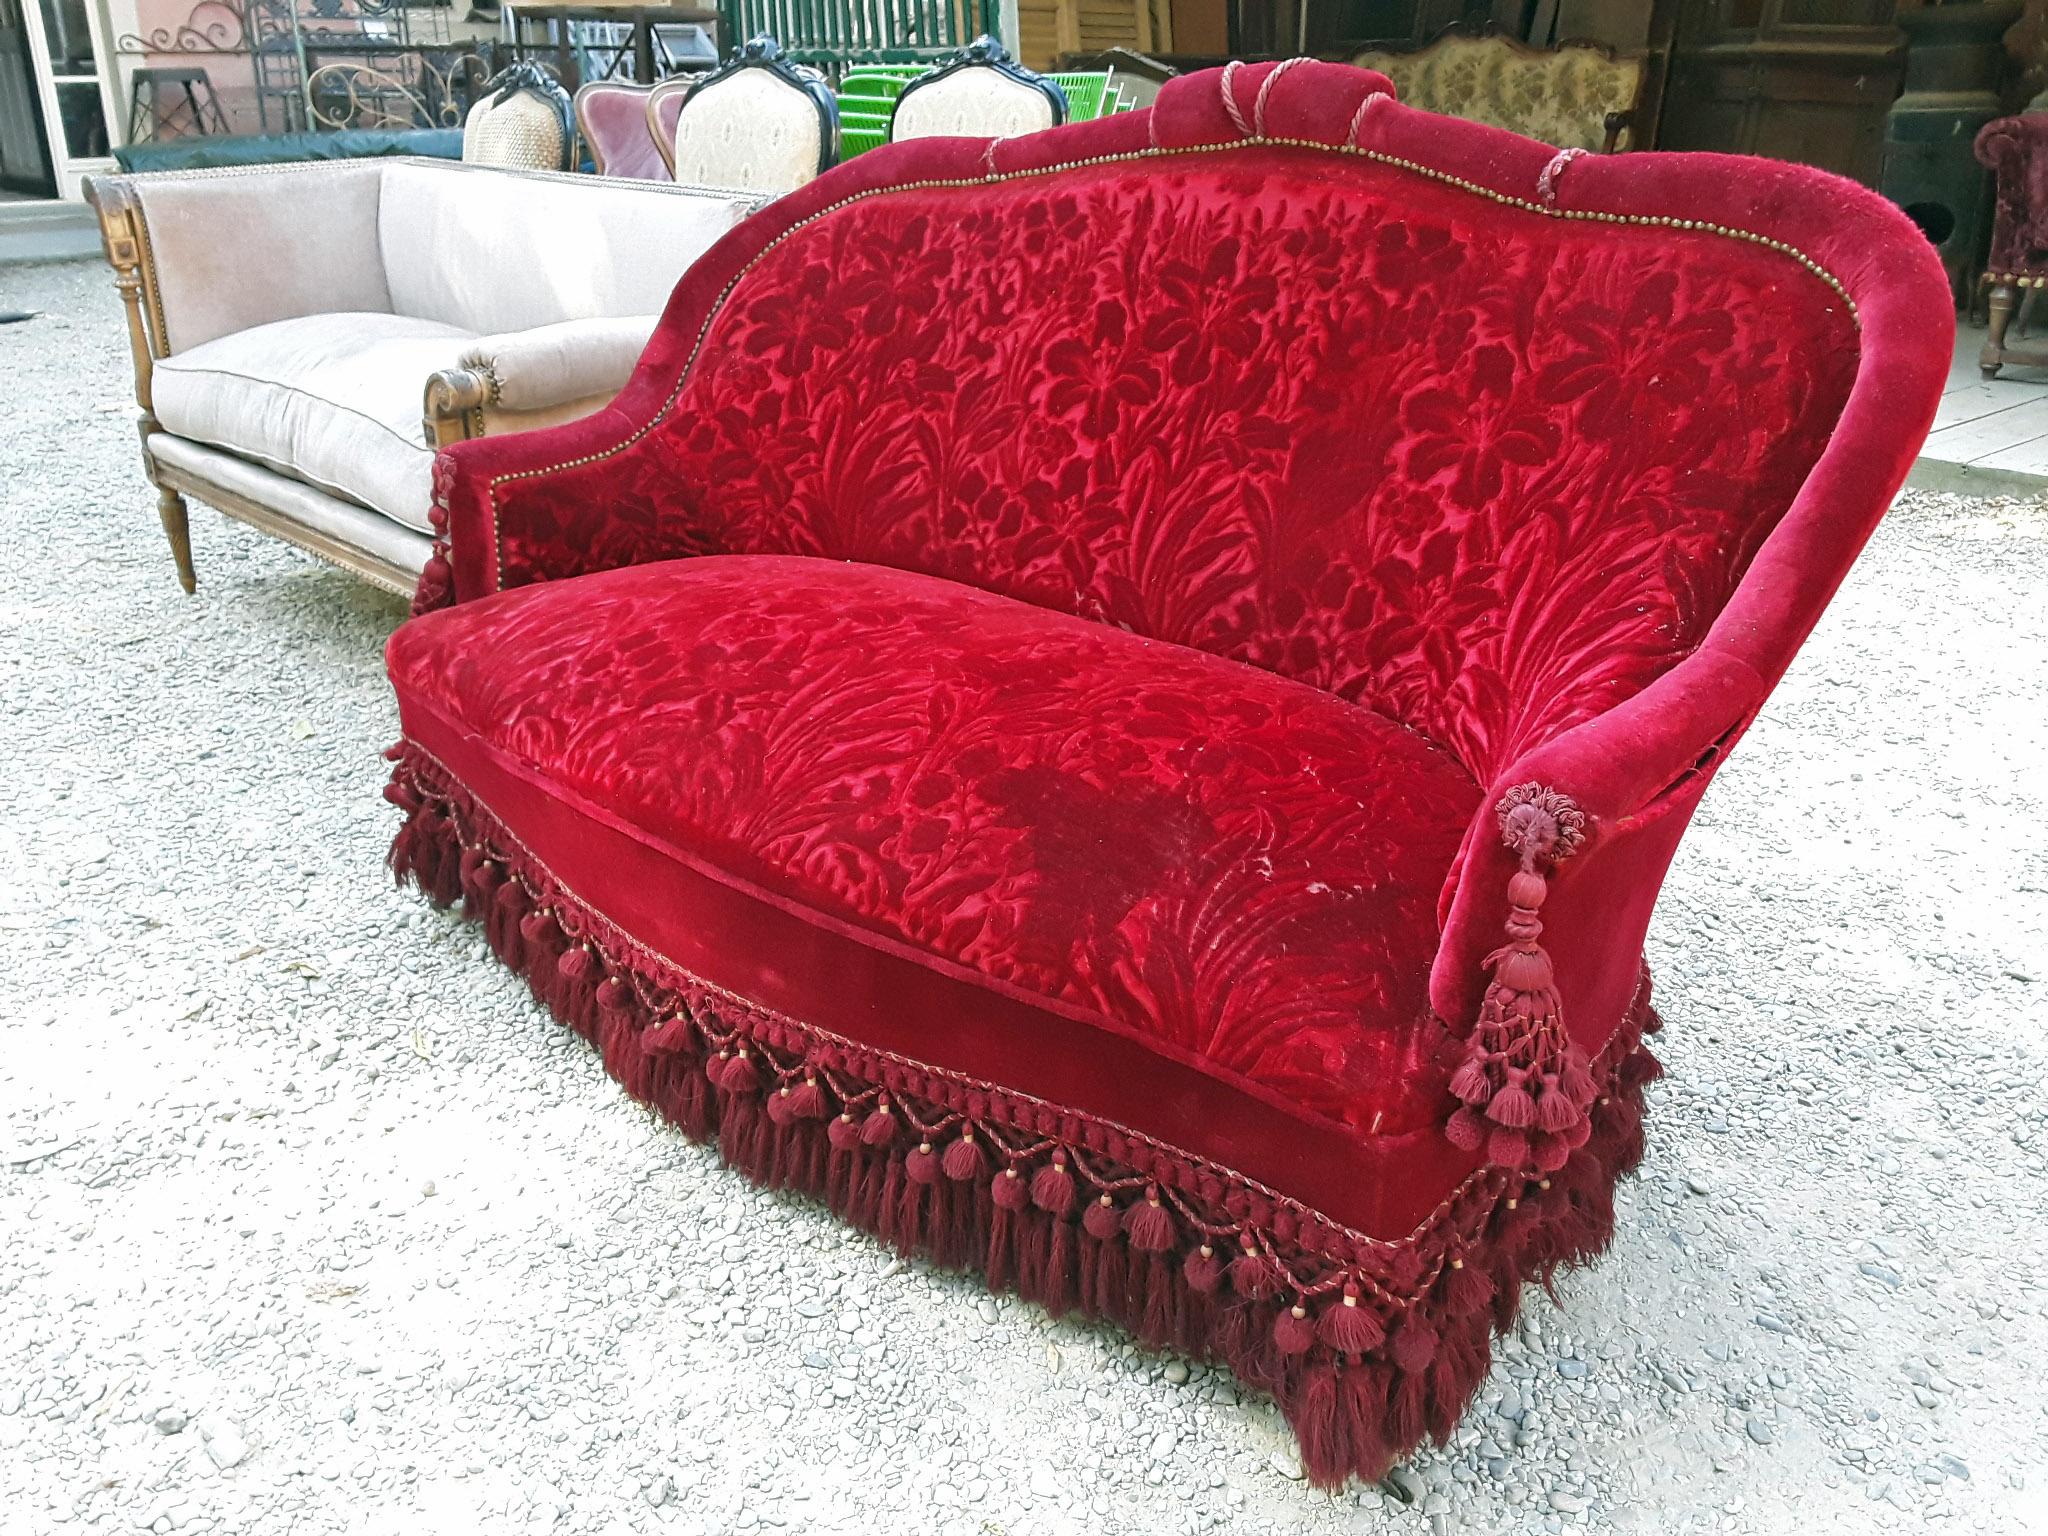 Victorian 19th Century, French Wooden Sofa with Its Original Brocade Velvet Fabric